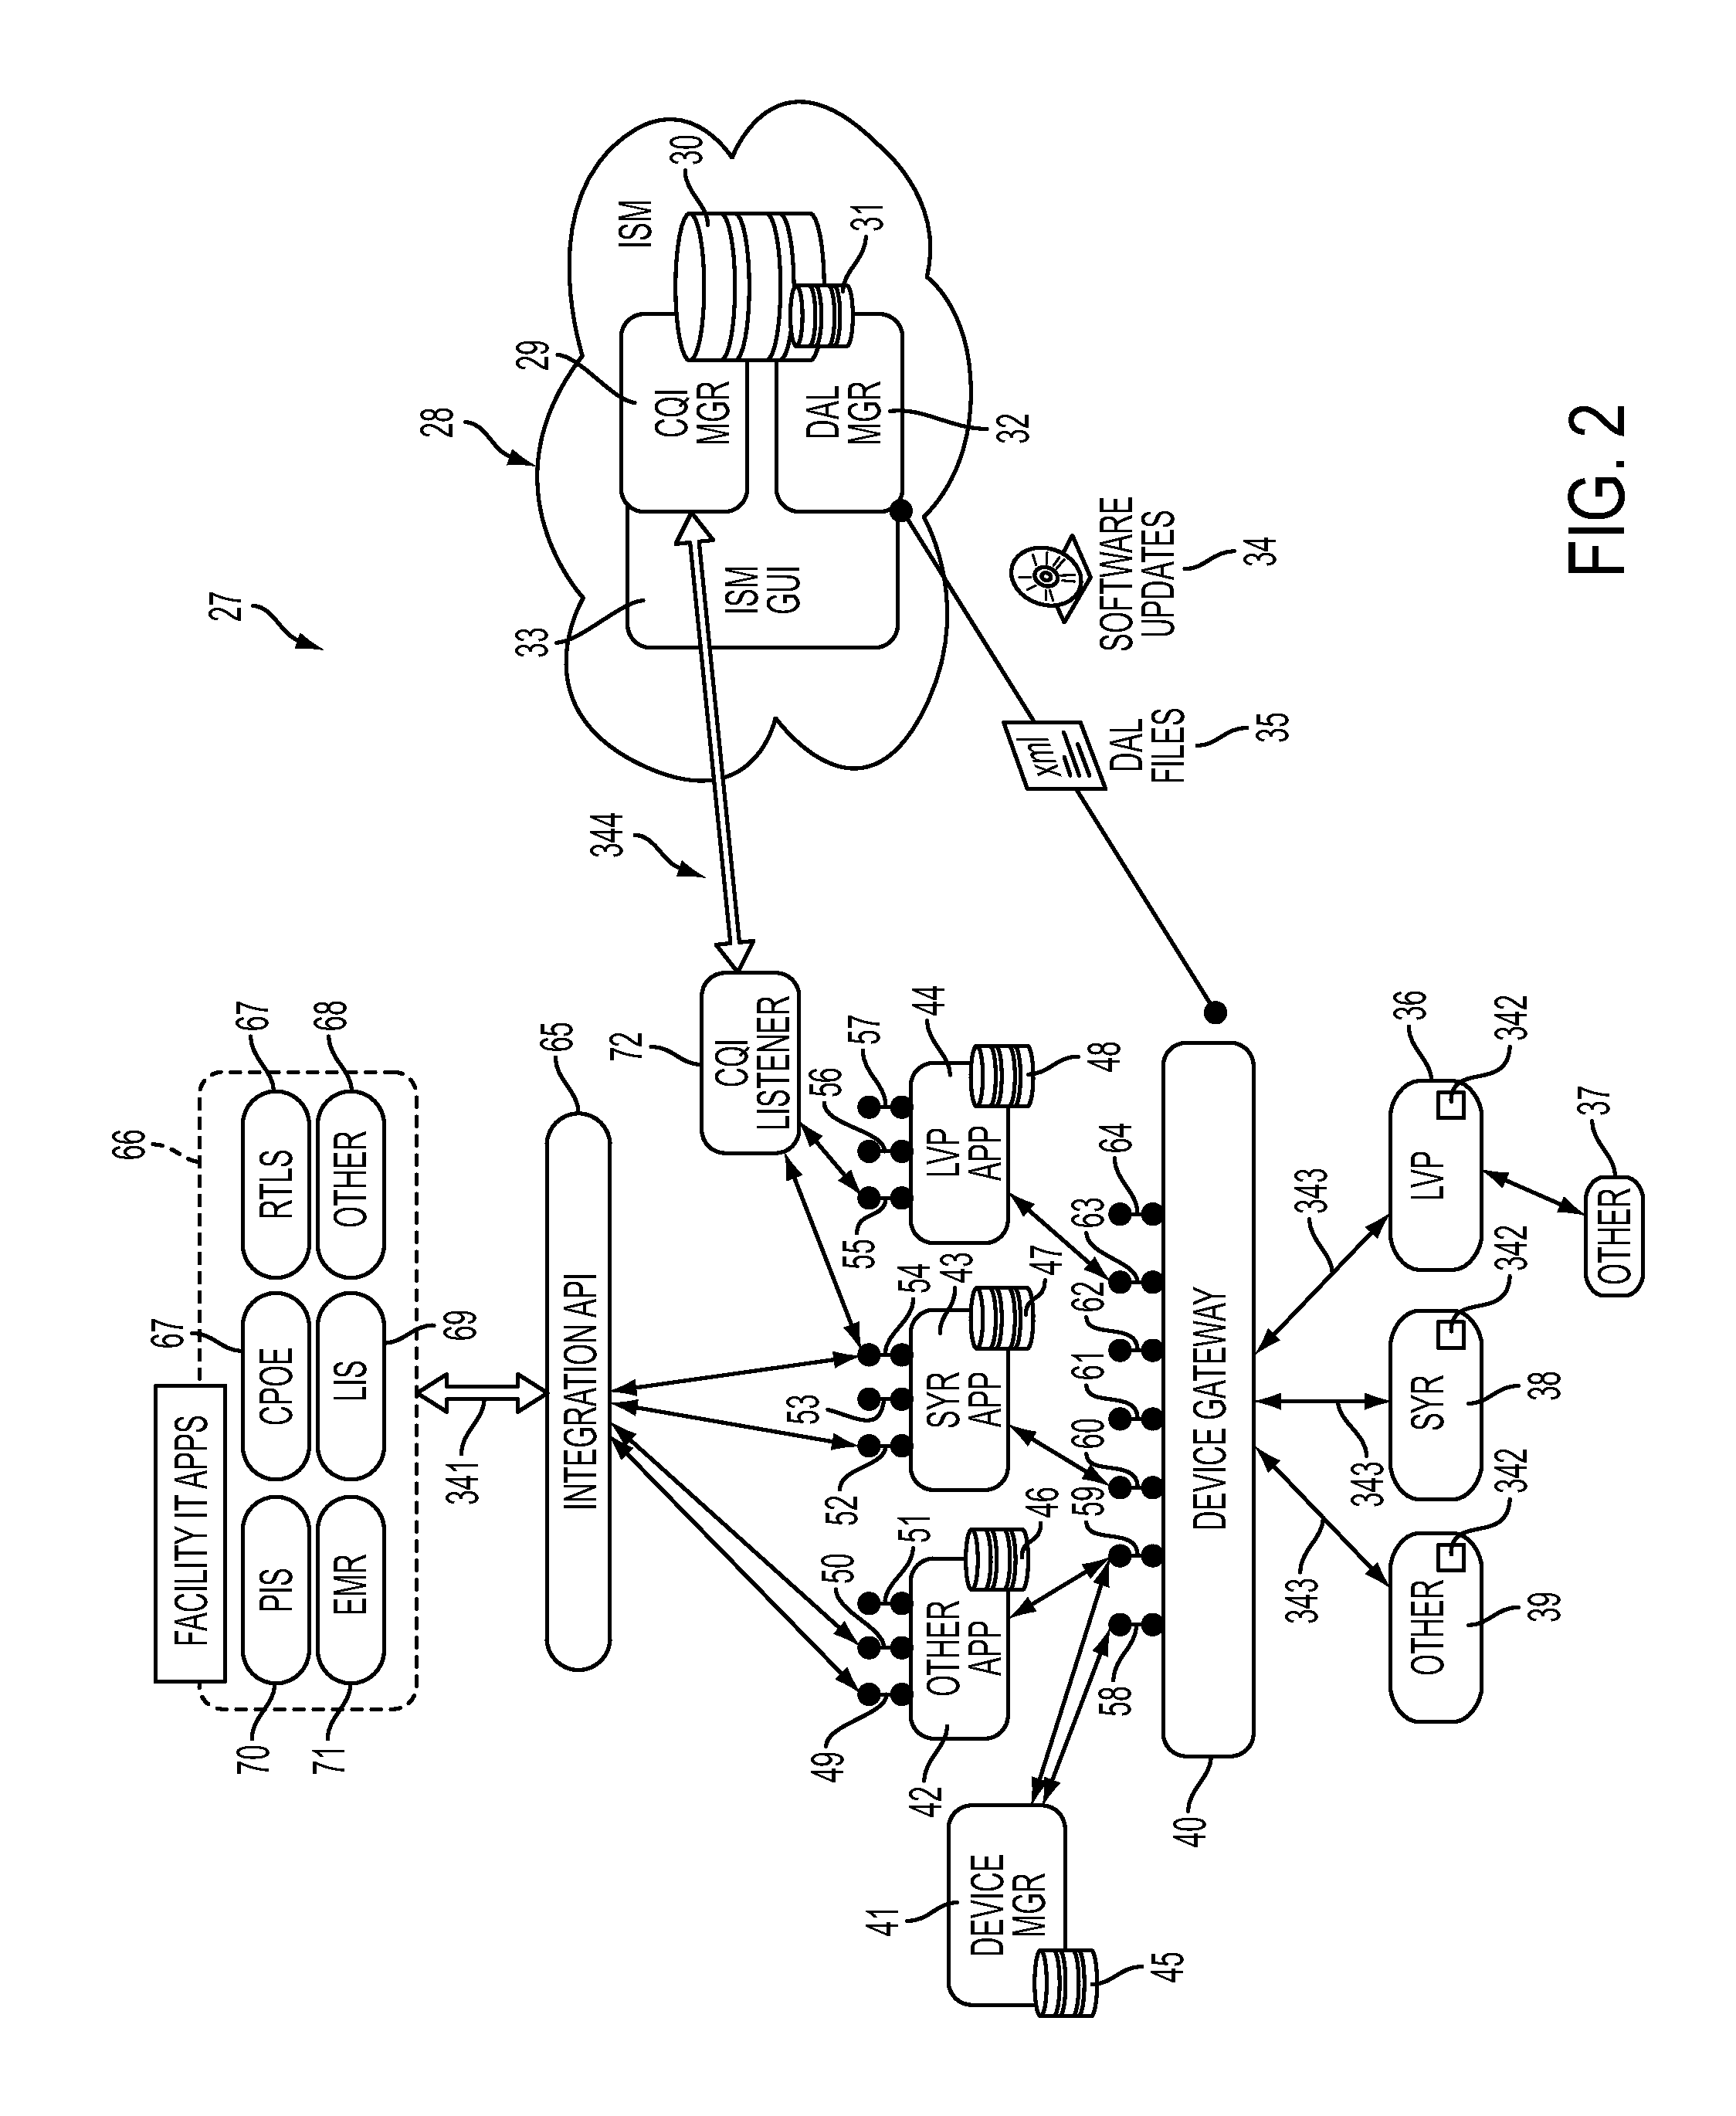 Computer-Implemented Method, System, and Apparatus for Electronic Patient Care